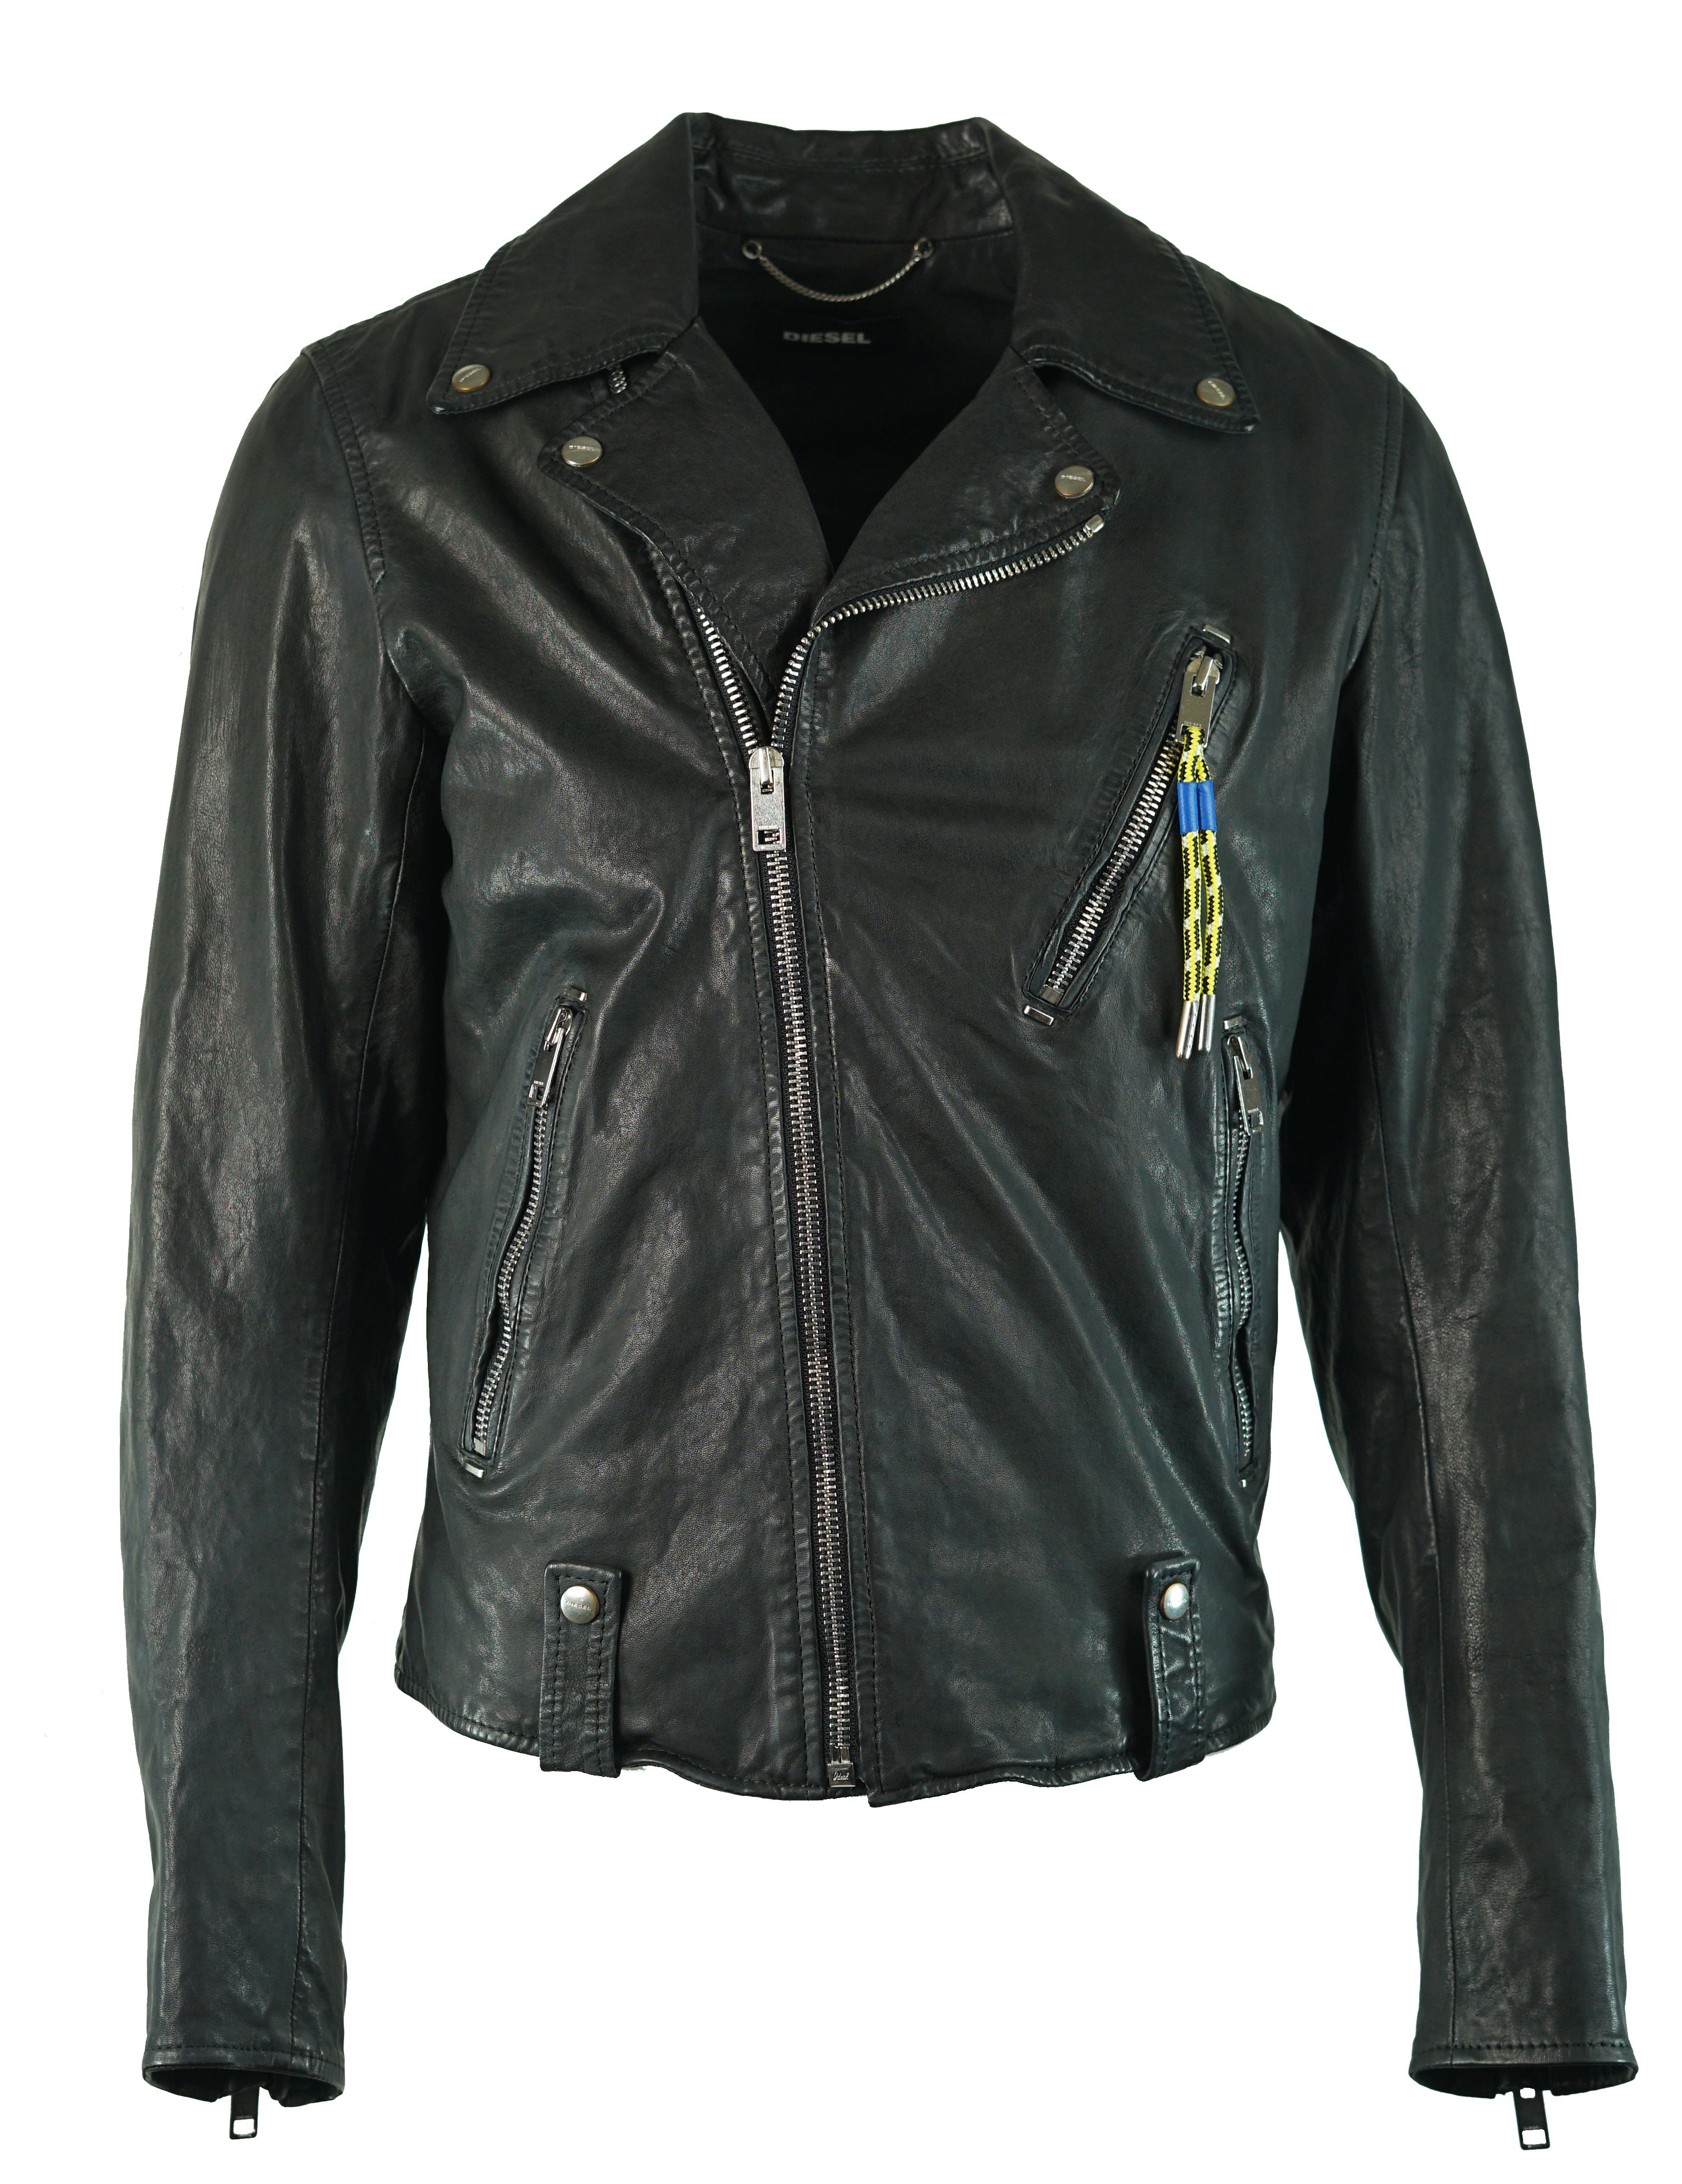 Diesel L-Willcox 900 Leather Jacket. 100% Sheepskin leather. Diagonal Zip Opening with Flap Cover. Fold Down Collar. Zip Fasten Pockets. Diagonal Chest Pocket